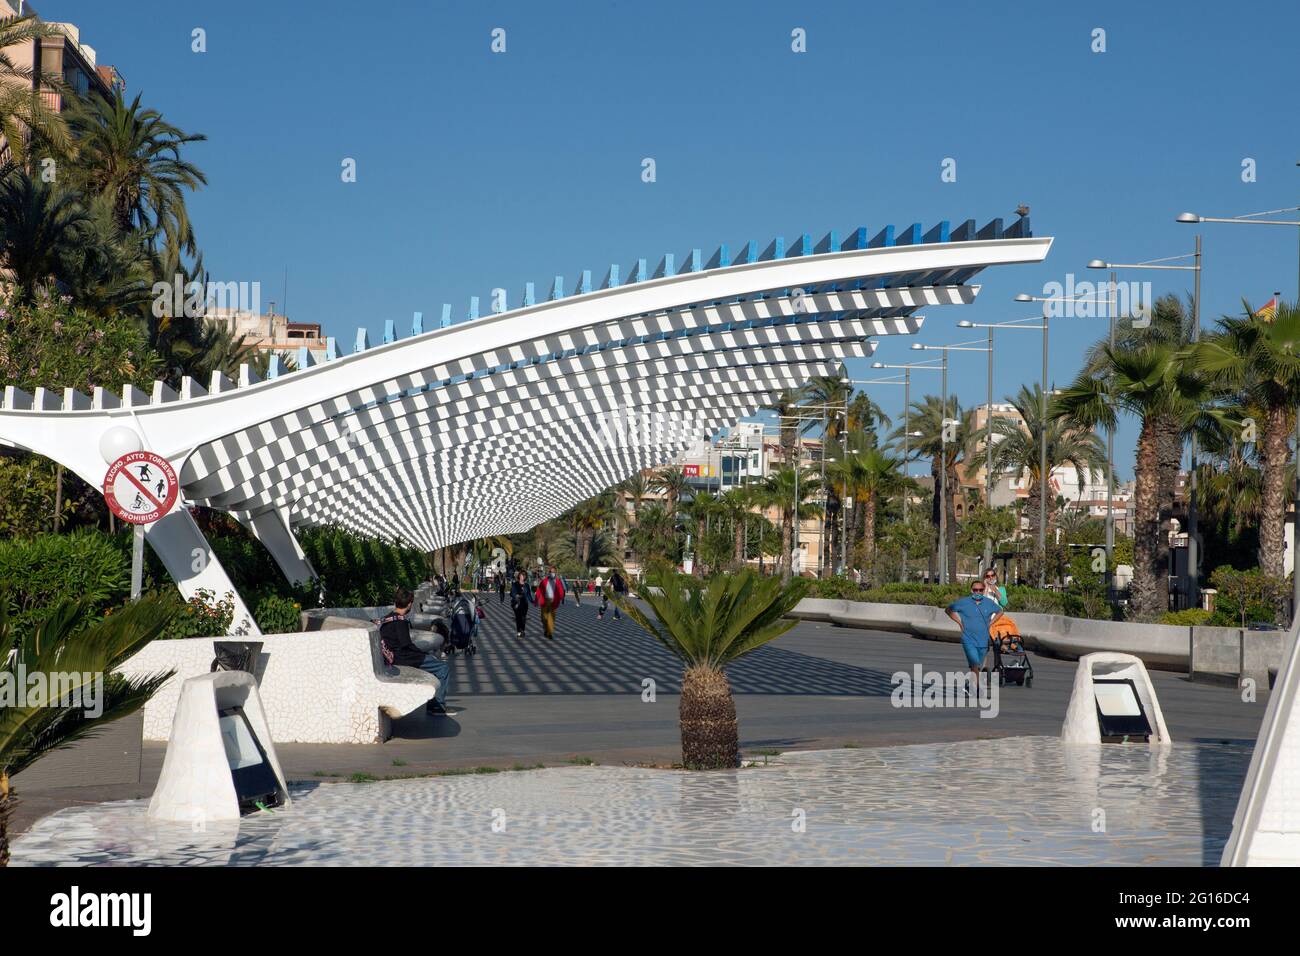 05-10-2021. Torrevieja, Alicante, Spain. The Paseo Vista Alegre is located next to the Nautical Club and is a very popular tourist area. It is a stree Stock Photo